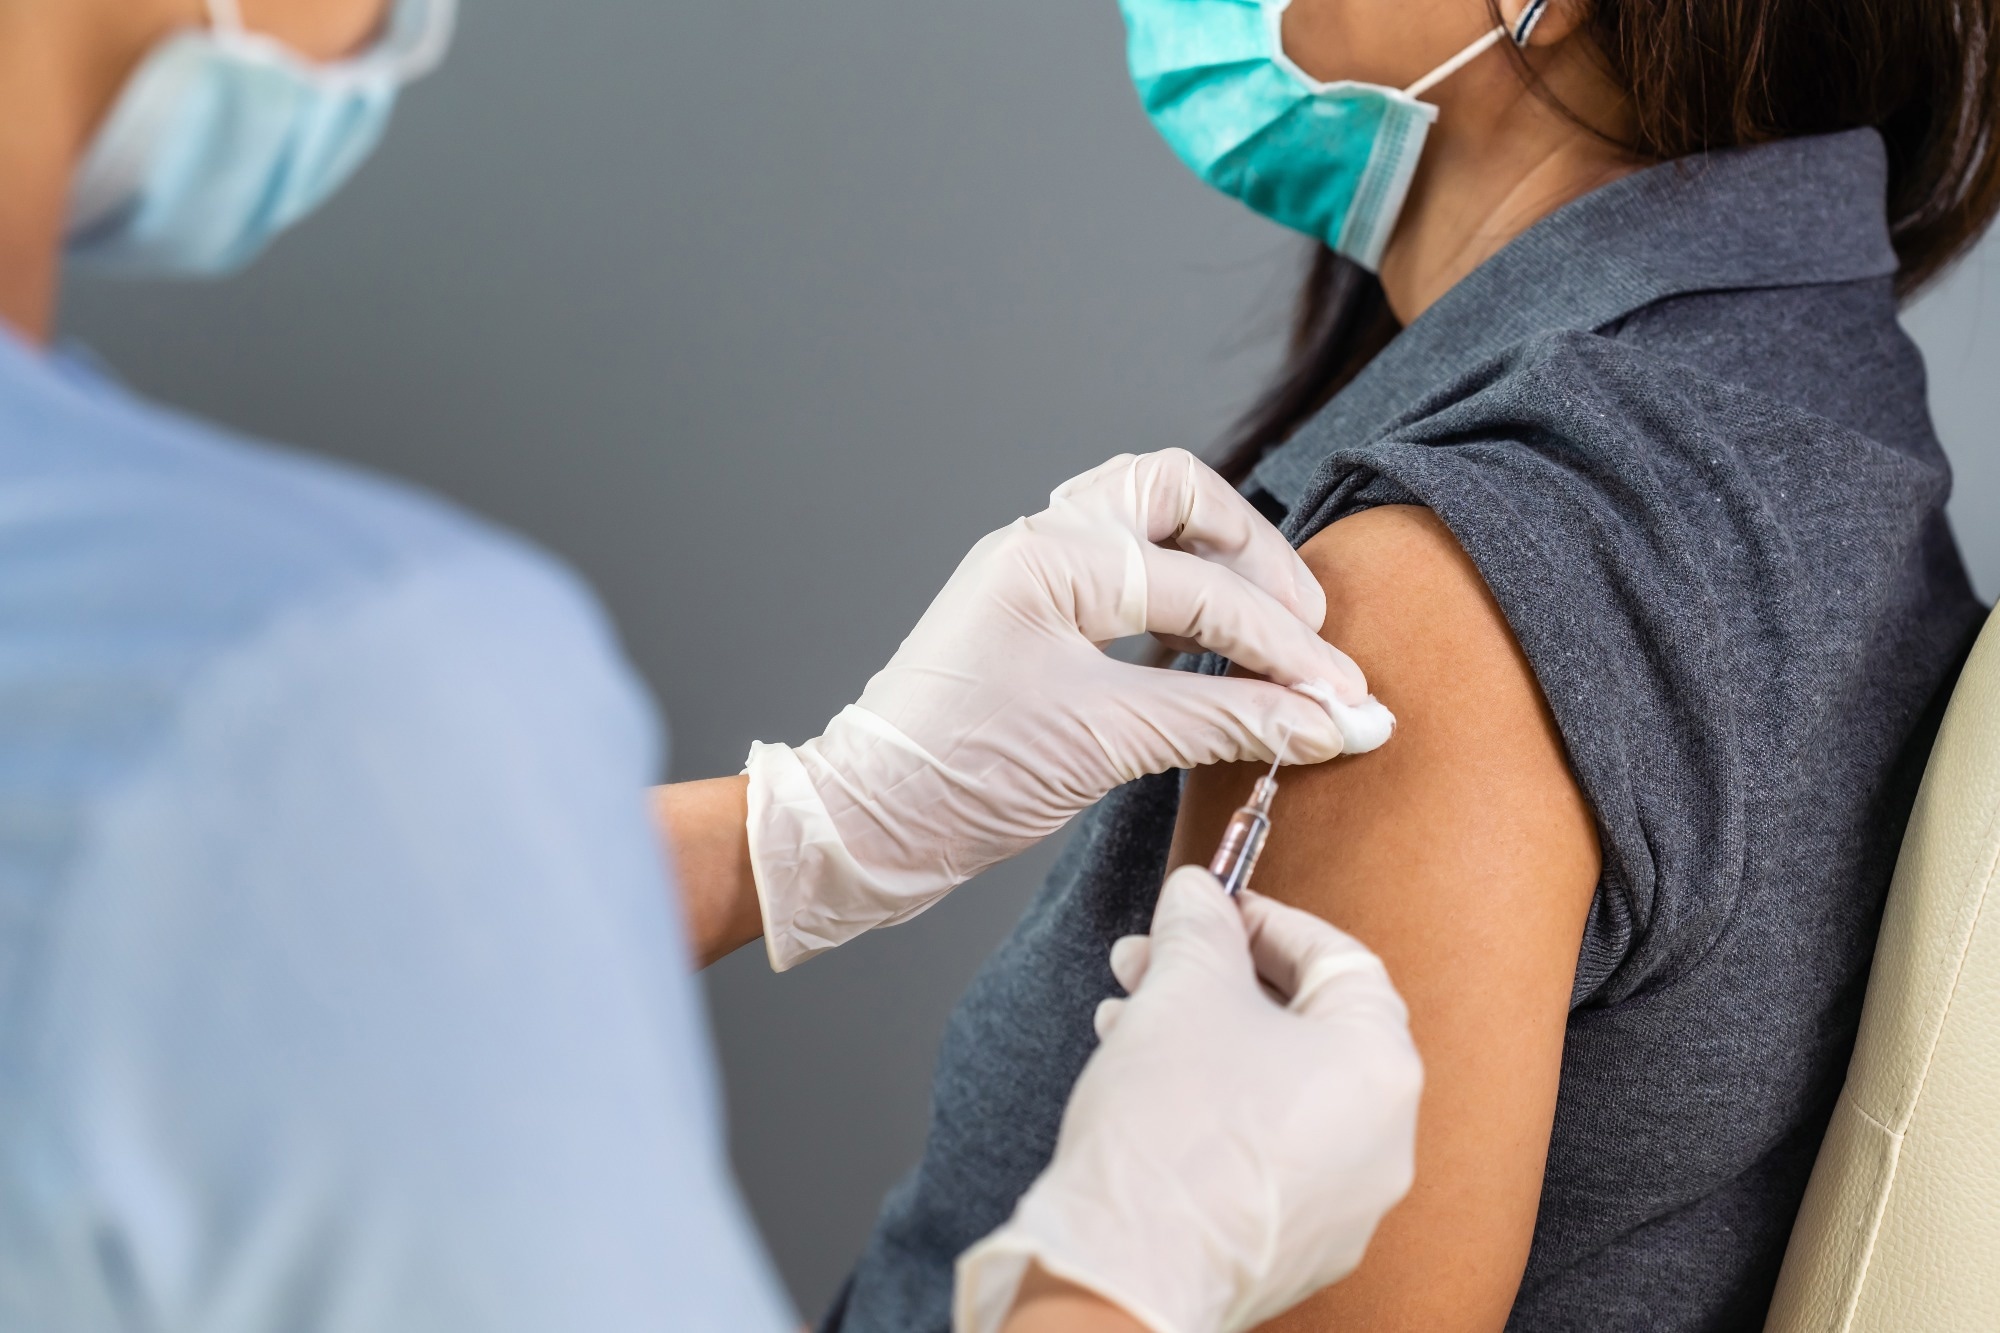 Study: Does repeated influenza vaccination attenuate effectiveness? A systematic review and meta-analysis. Image Credit: BaLL LunLa/Shutterstock